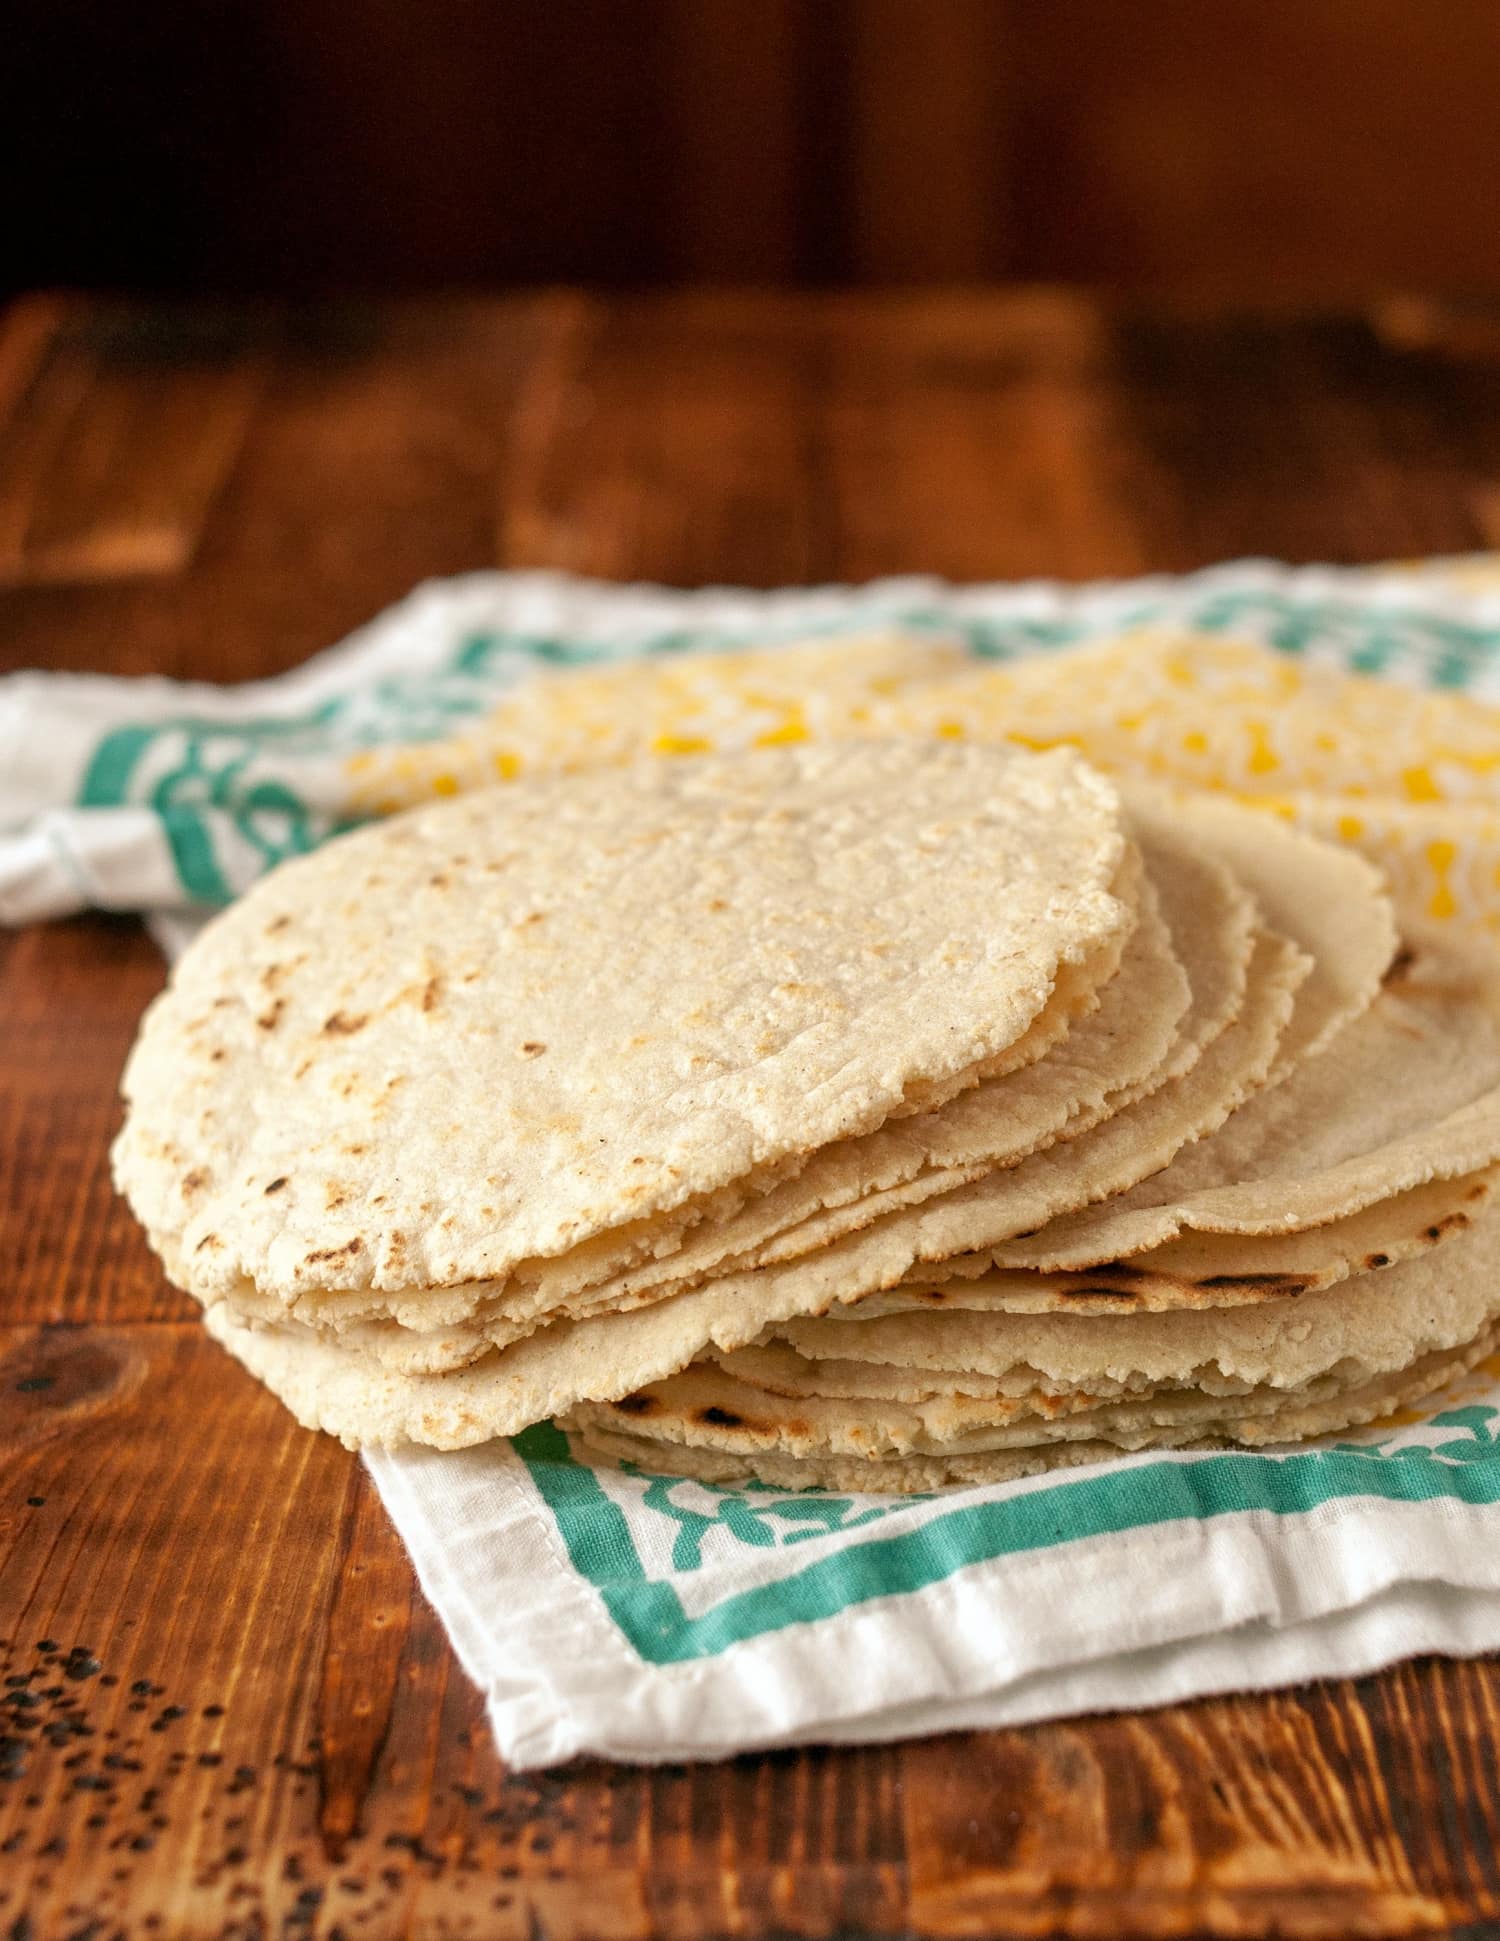 How To Make Corn Tortillas from Scratch | Kitchn